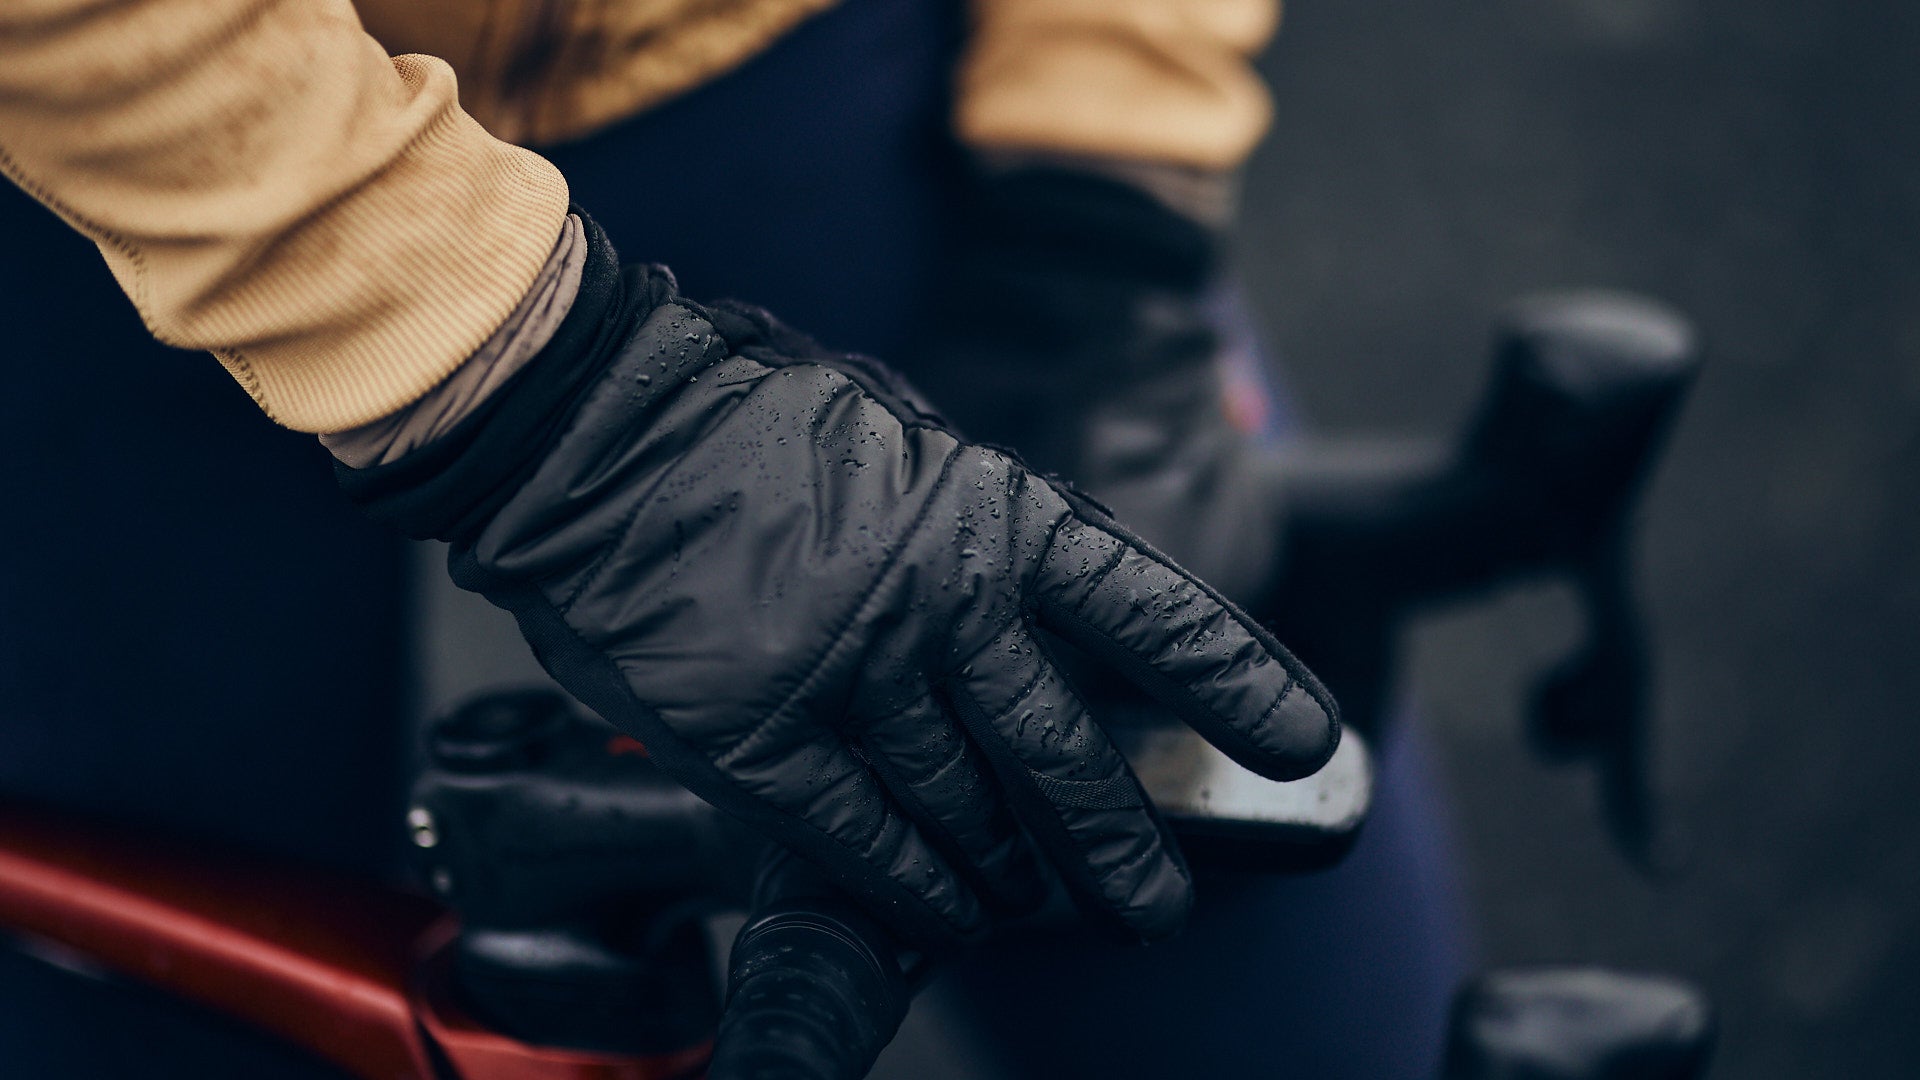 Classic Cycling Gloves